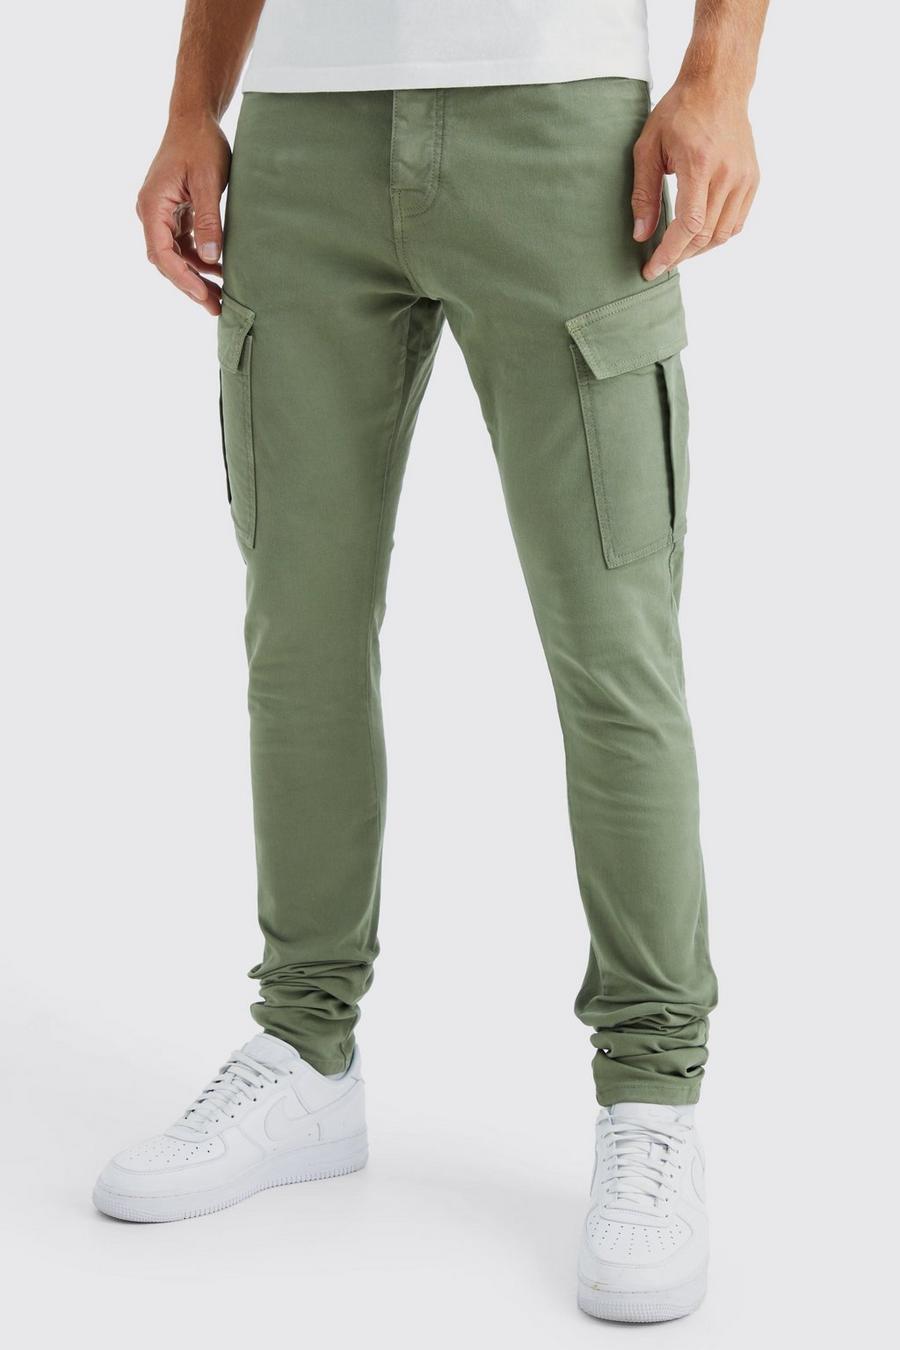 Olive Tall Stacked Skinny Fit Cargo Broek Met Tailleband image number 1